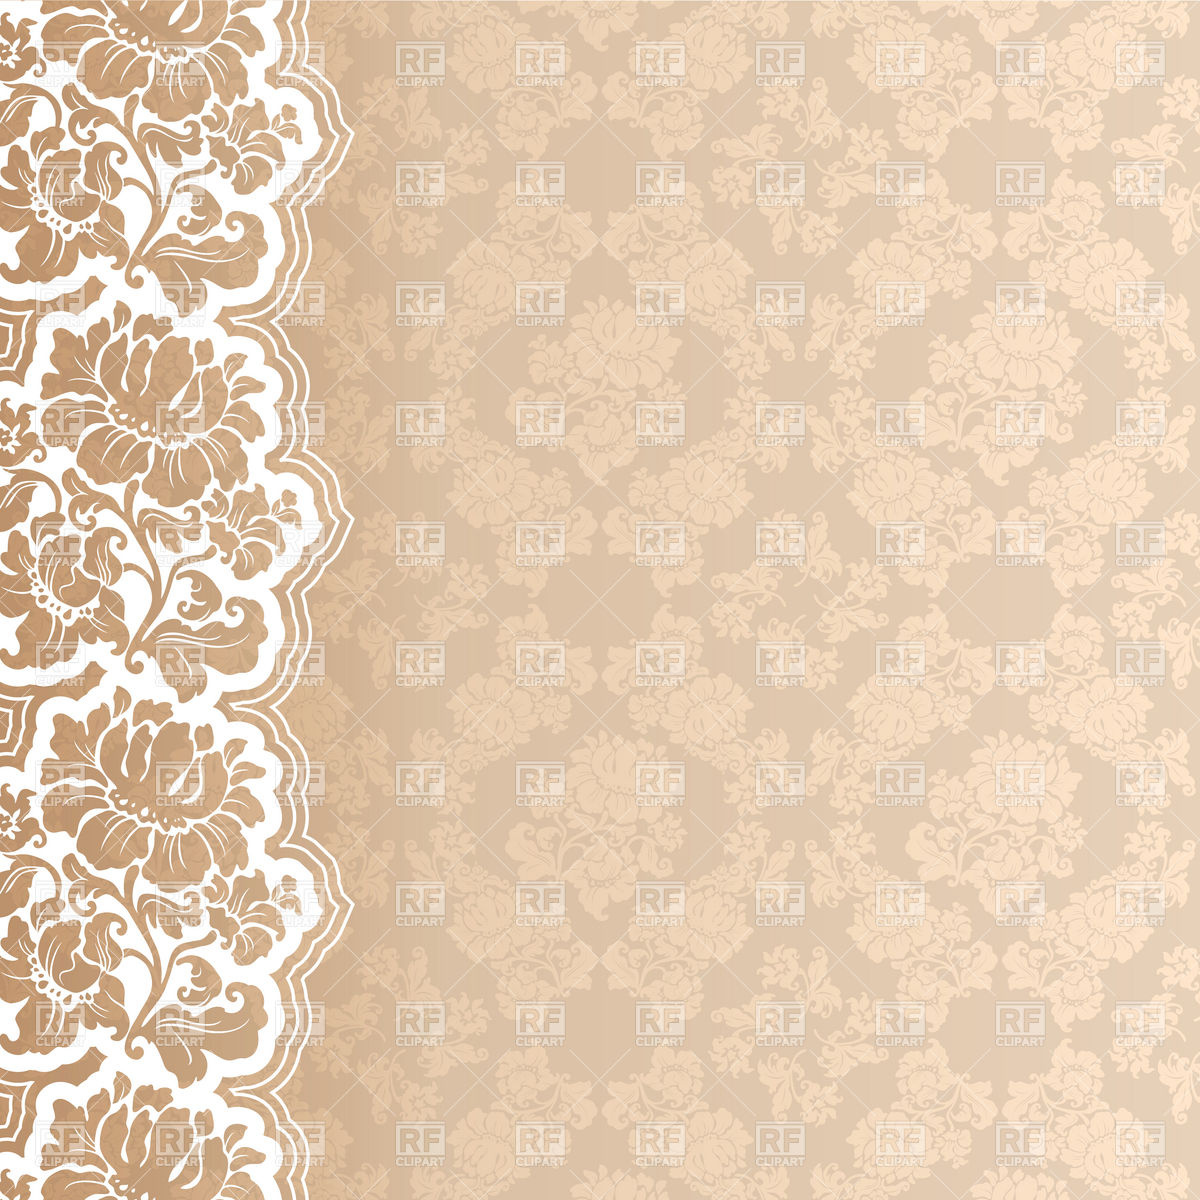 Floral Victorian Wallpaper With Lace Border Royalty